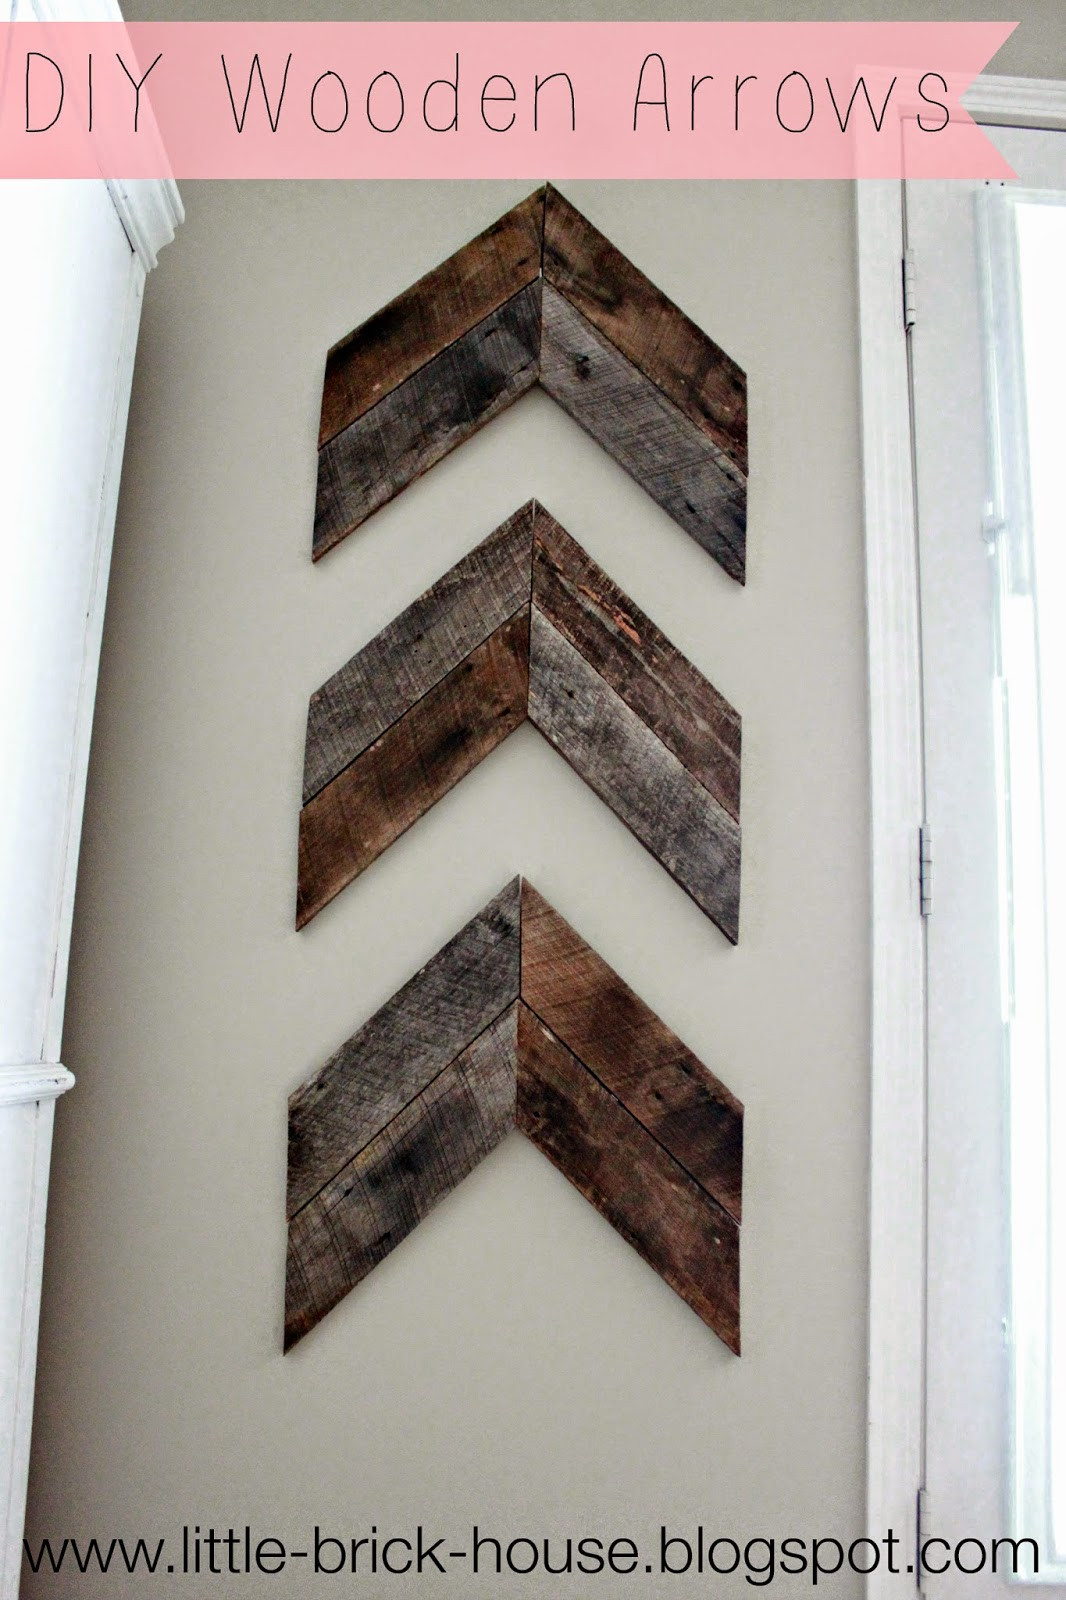 Best ideas about DIY Wood Decor
. Save or Pin Little Brick House Reclaimed Wood Project DIY Wooden Arrows Now.